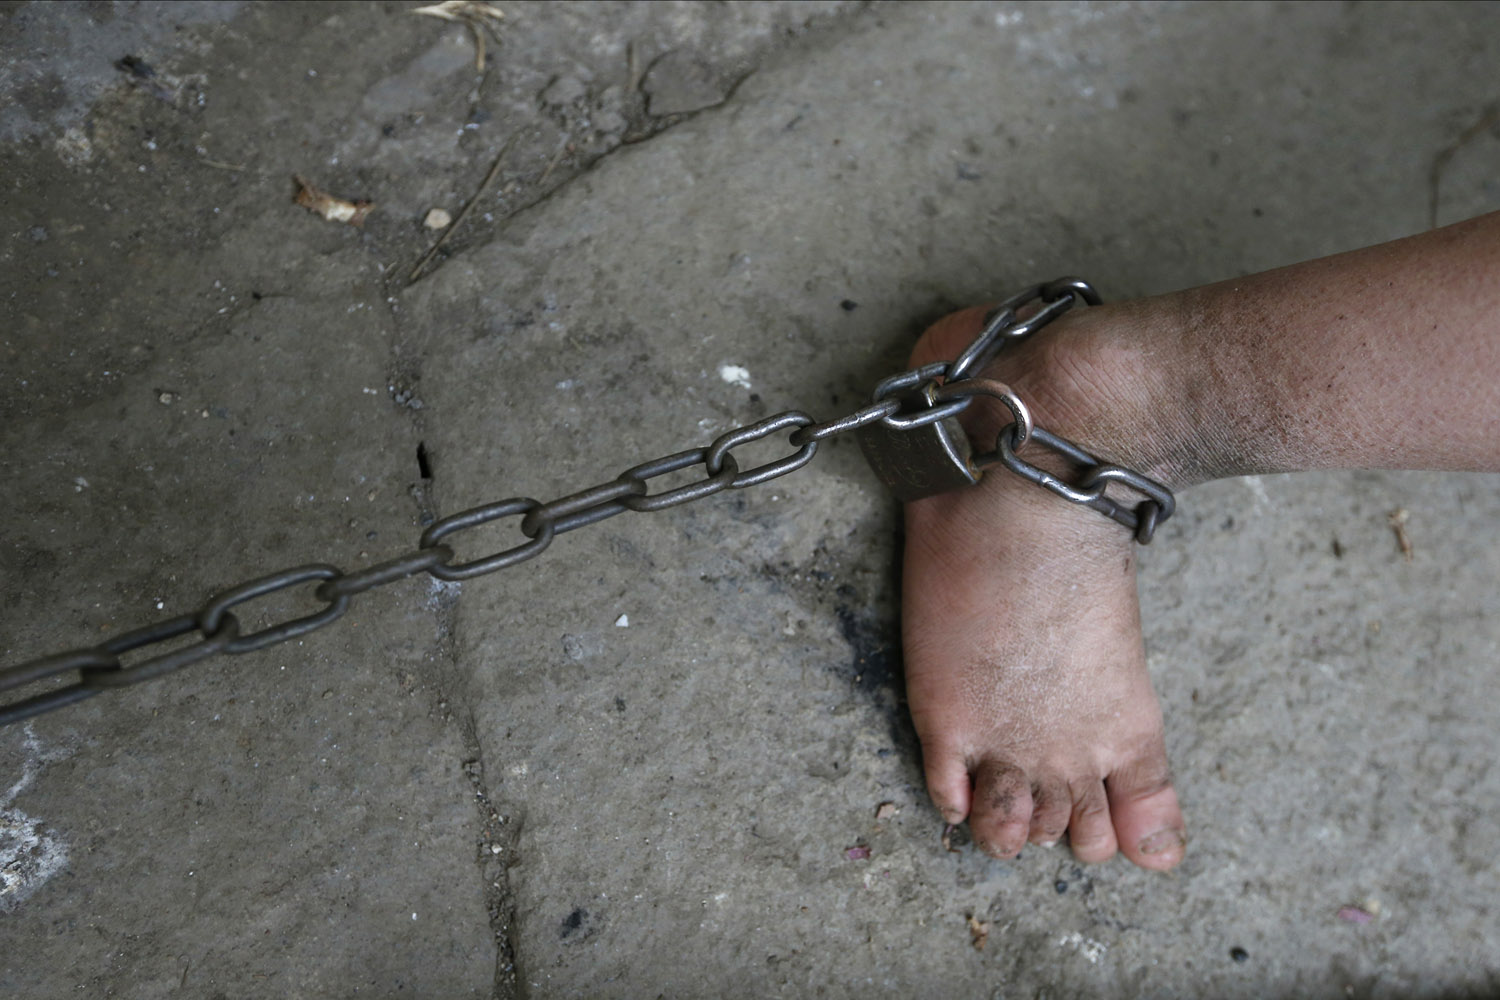 The chains around the ankle of eleven-year-old He Zili is seen in his home in Zhejiang province